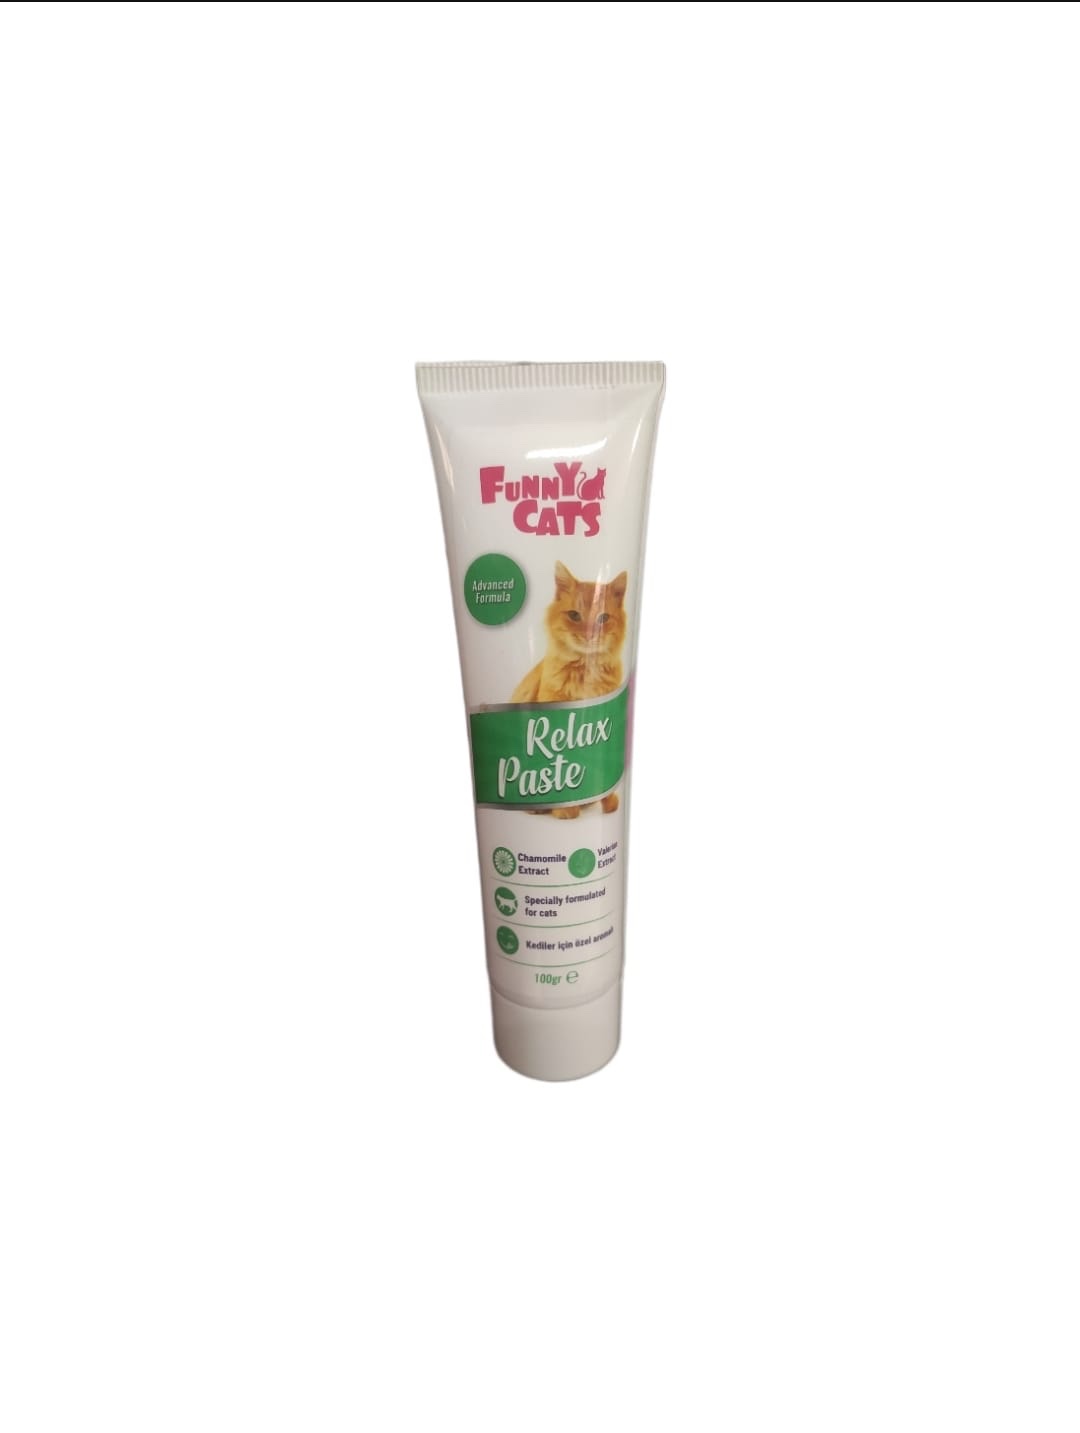 FUNNY CATS RELAX PASTE 100 Gr